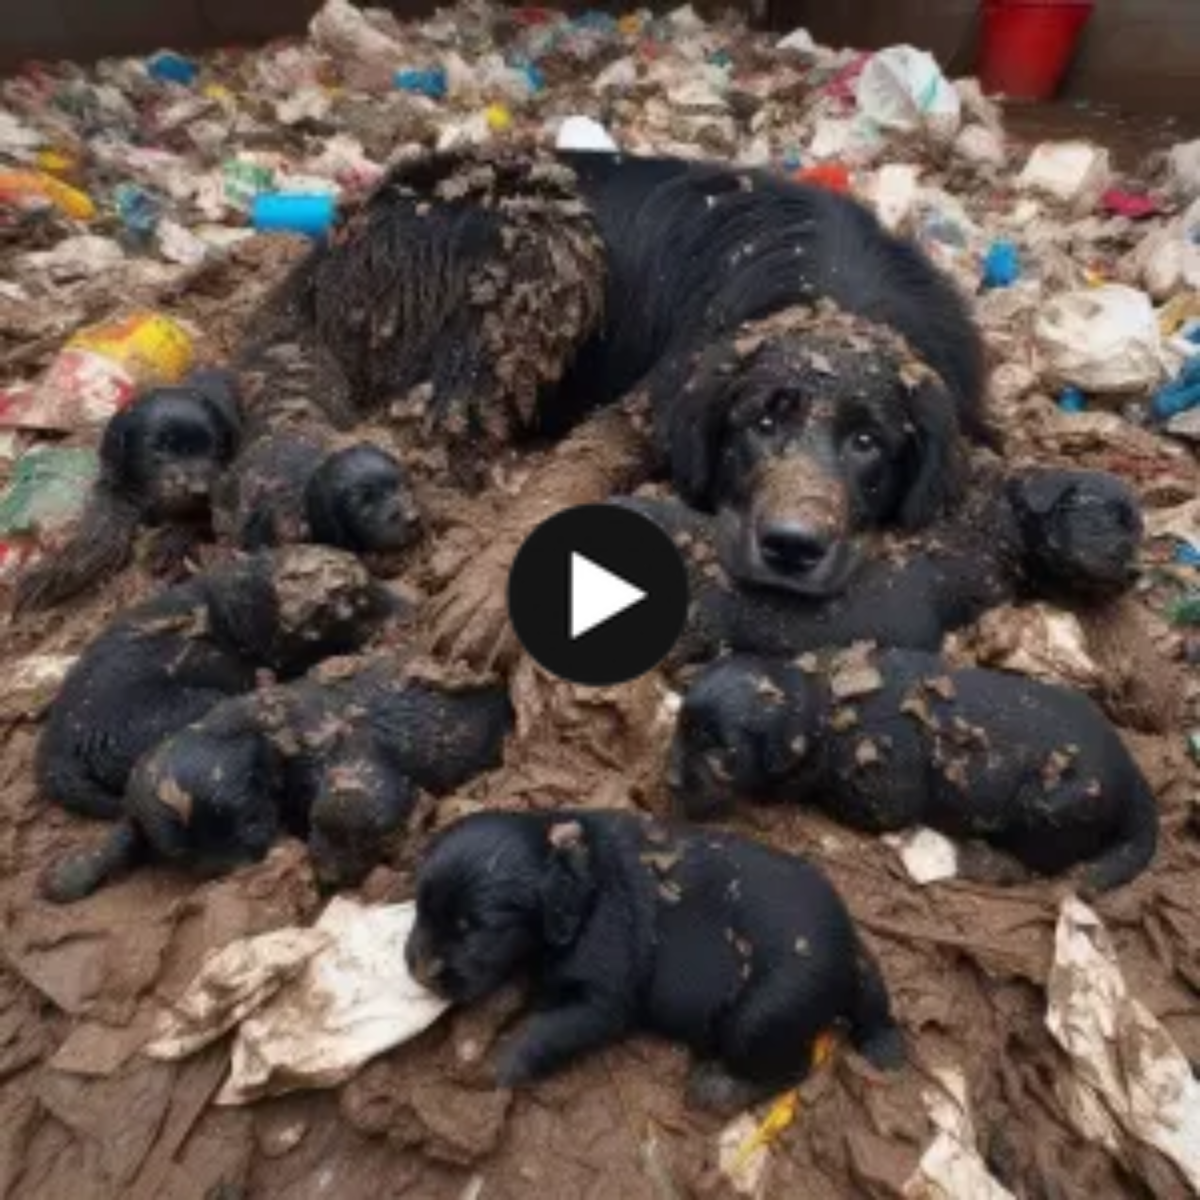 image of a helpless mother dog and priceless puppies left in the trash. The mother dog only wants her children to be healthy